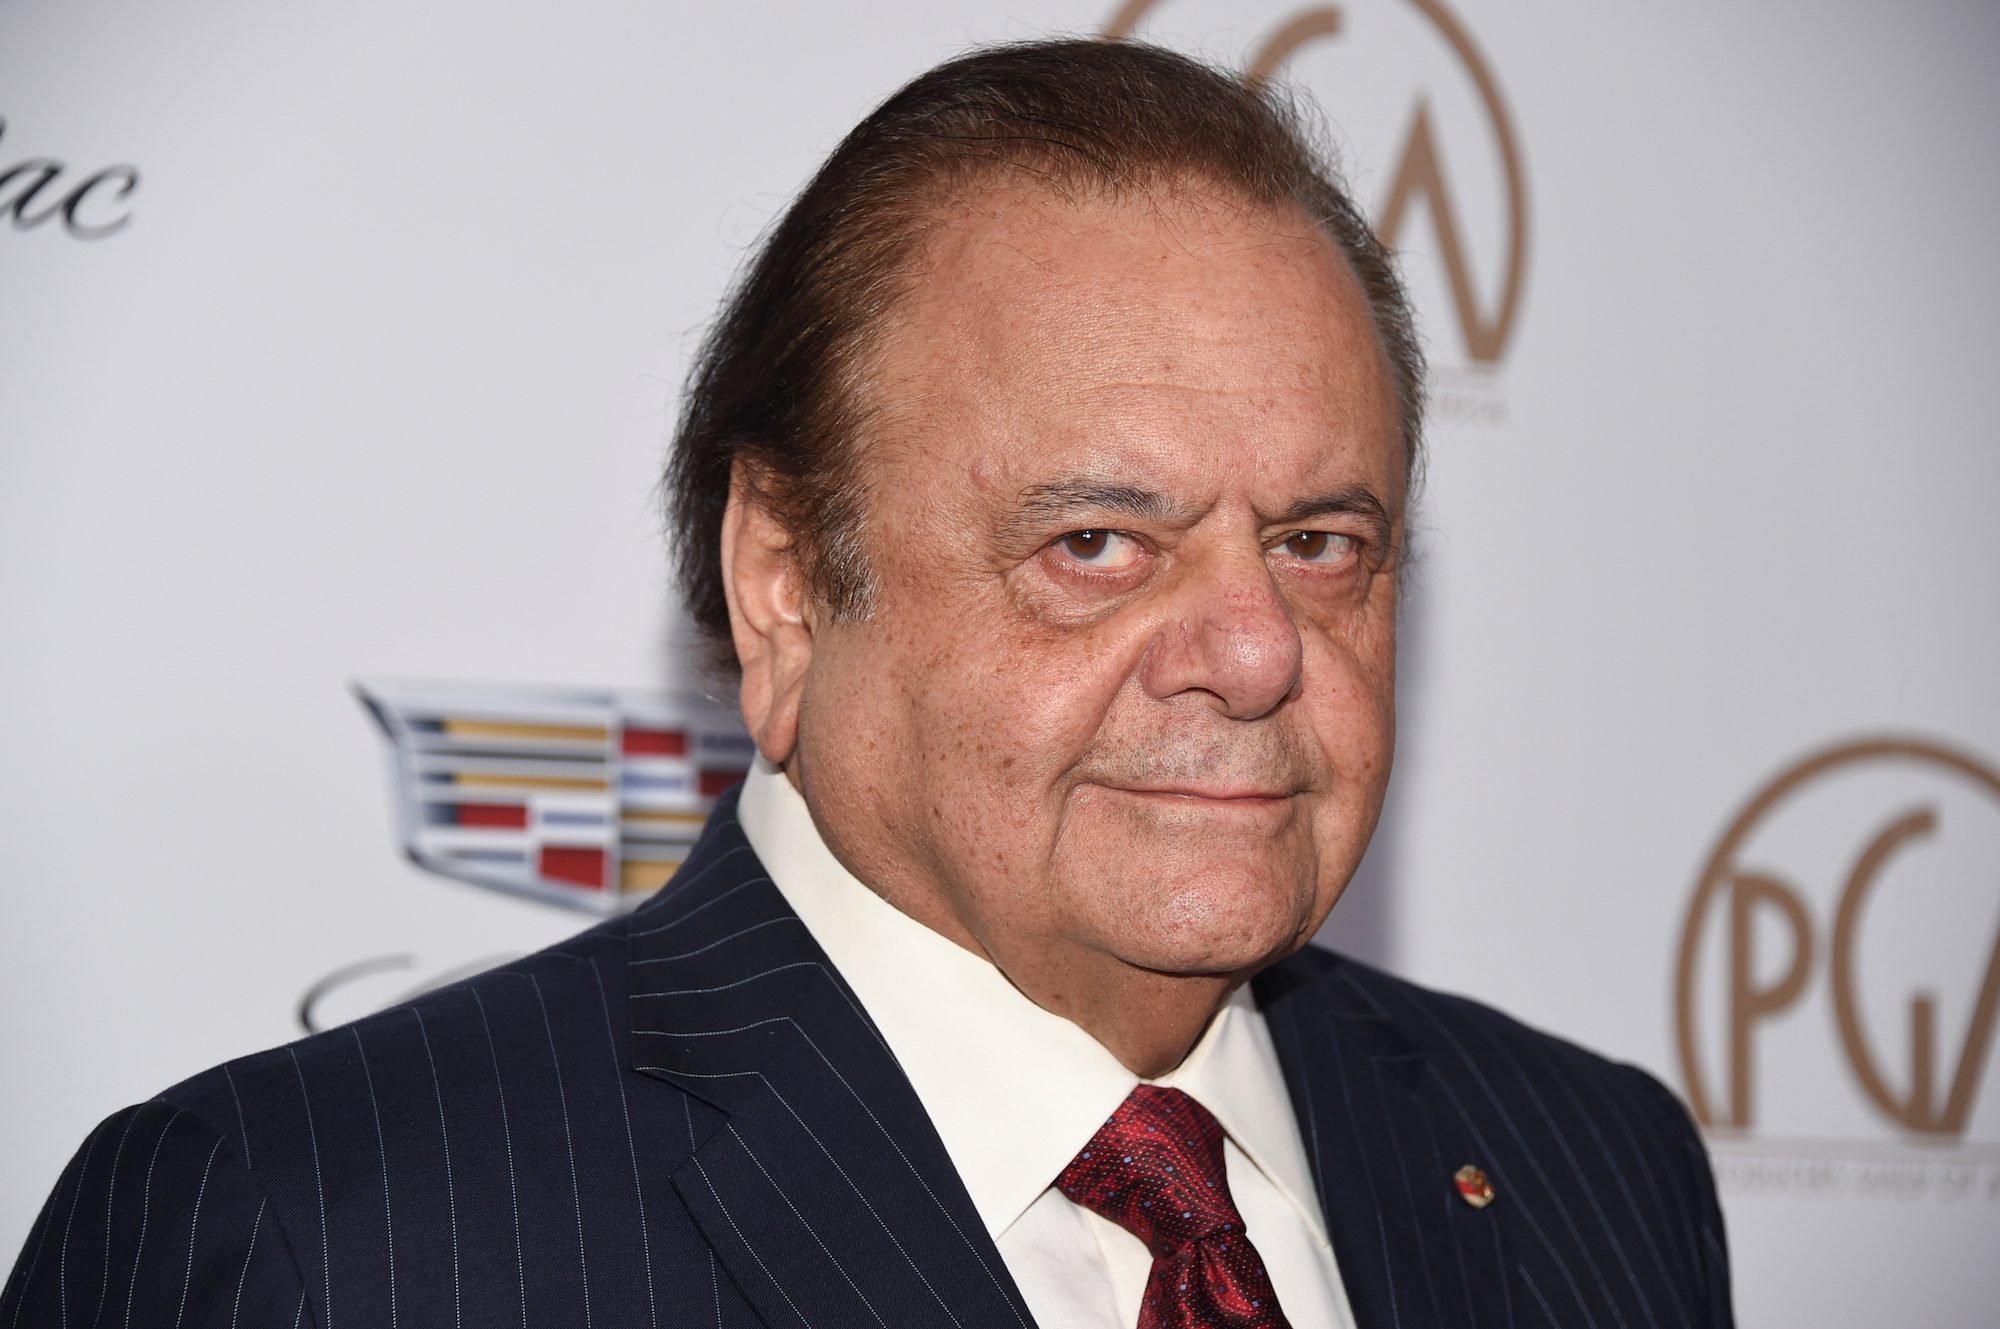 Paul Sorvino attends the 29th annual Producers Guild Awards in Beverly Hills, California, U.S. January 20, 2018. REUTERS/Phil McCarten